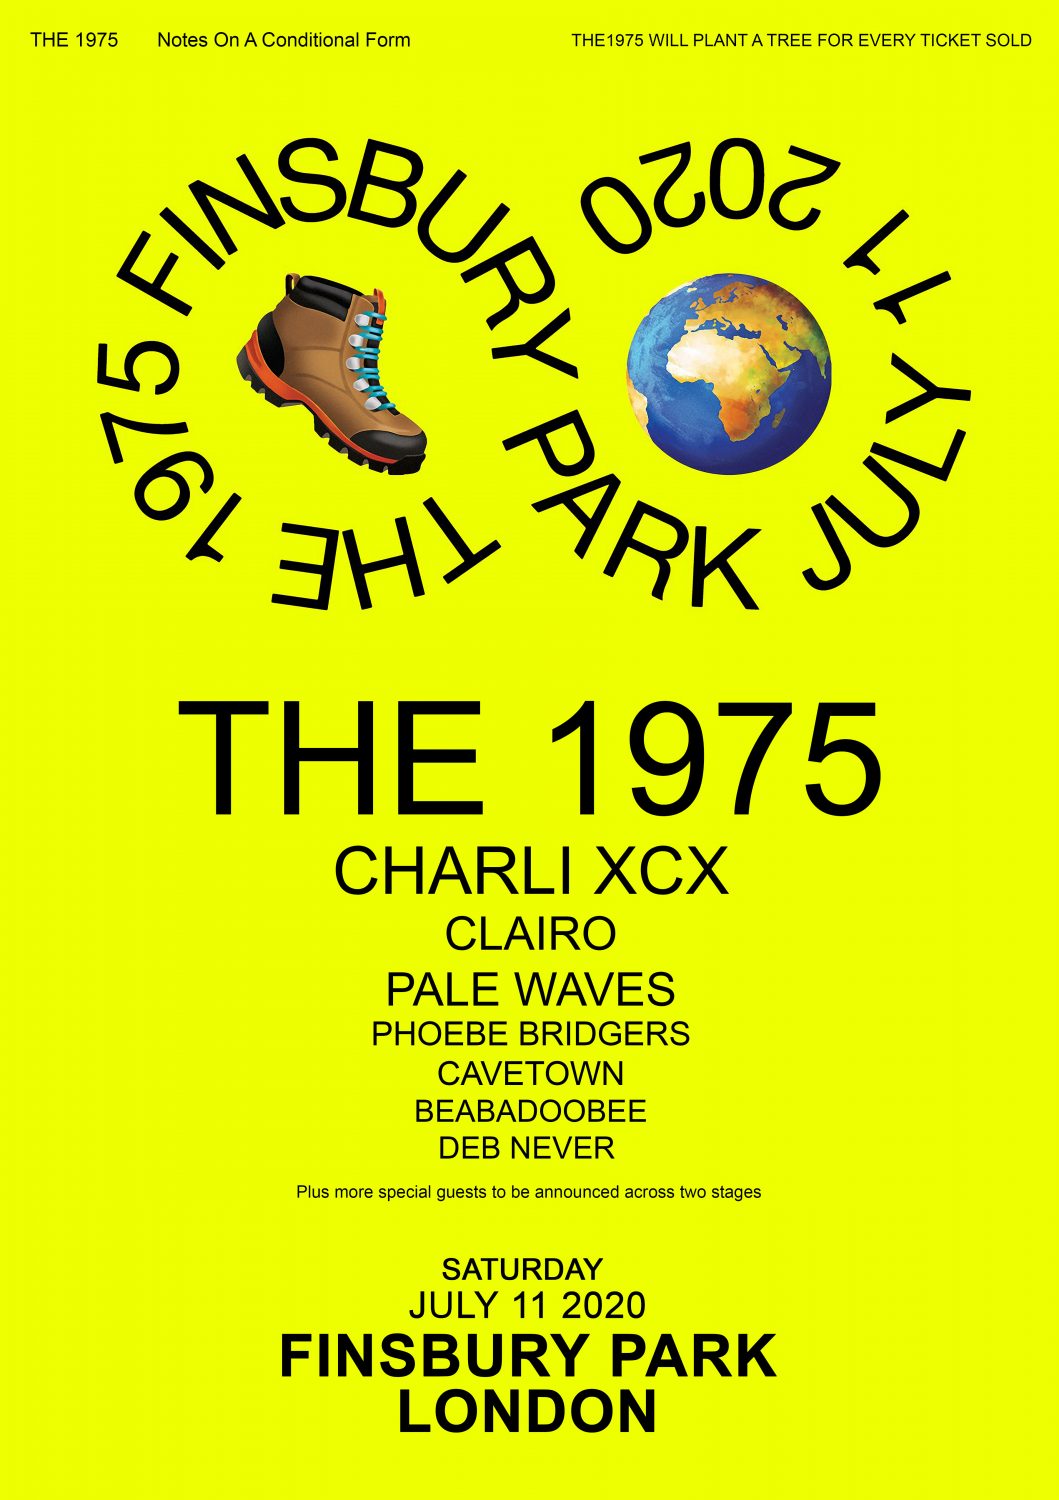 THE 1975 LONDON Finsbury Park Poster Note Form 2020 Tour